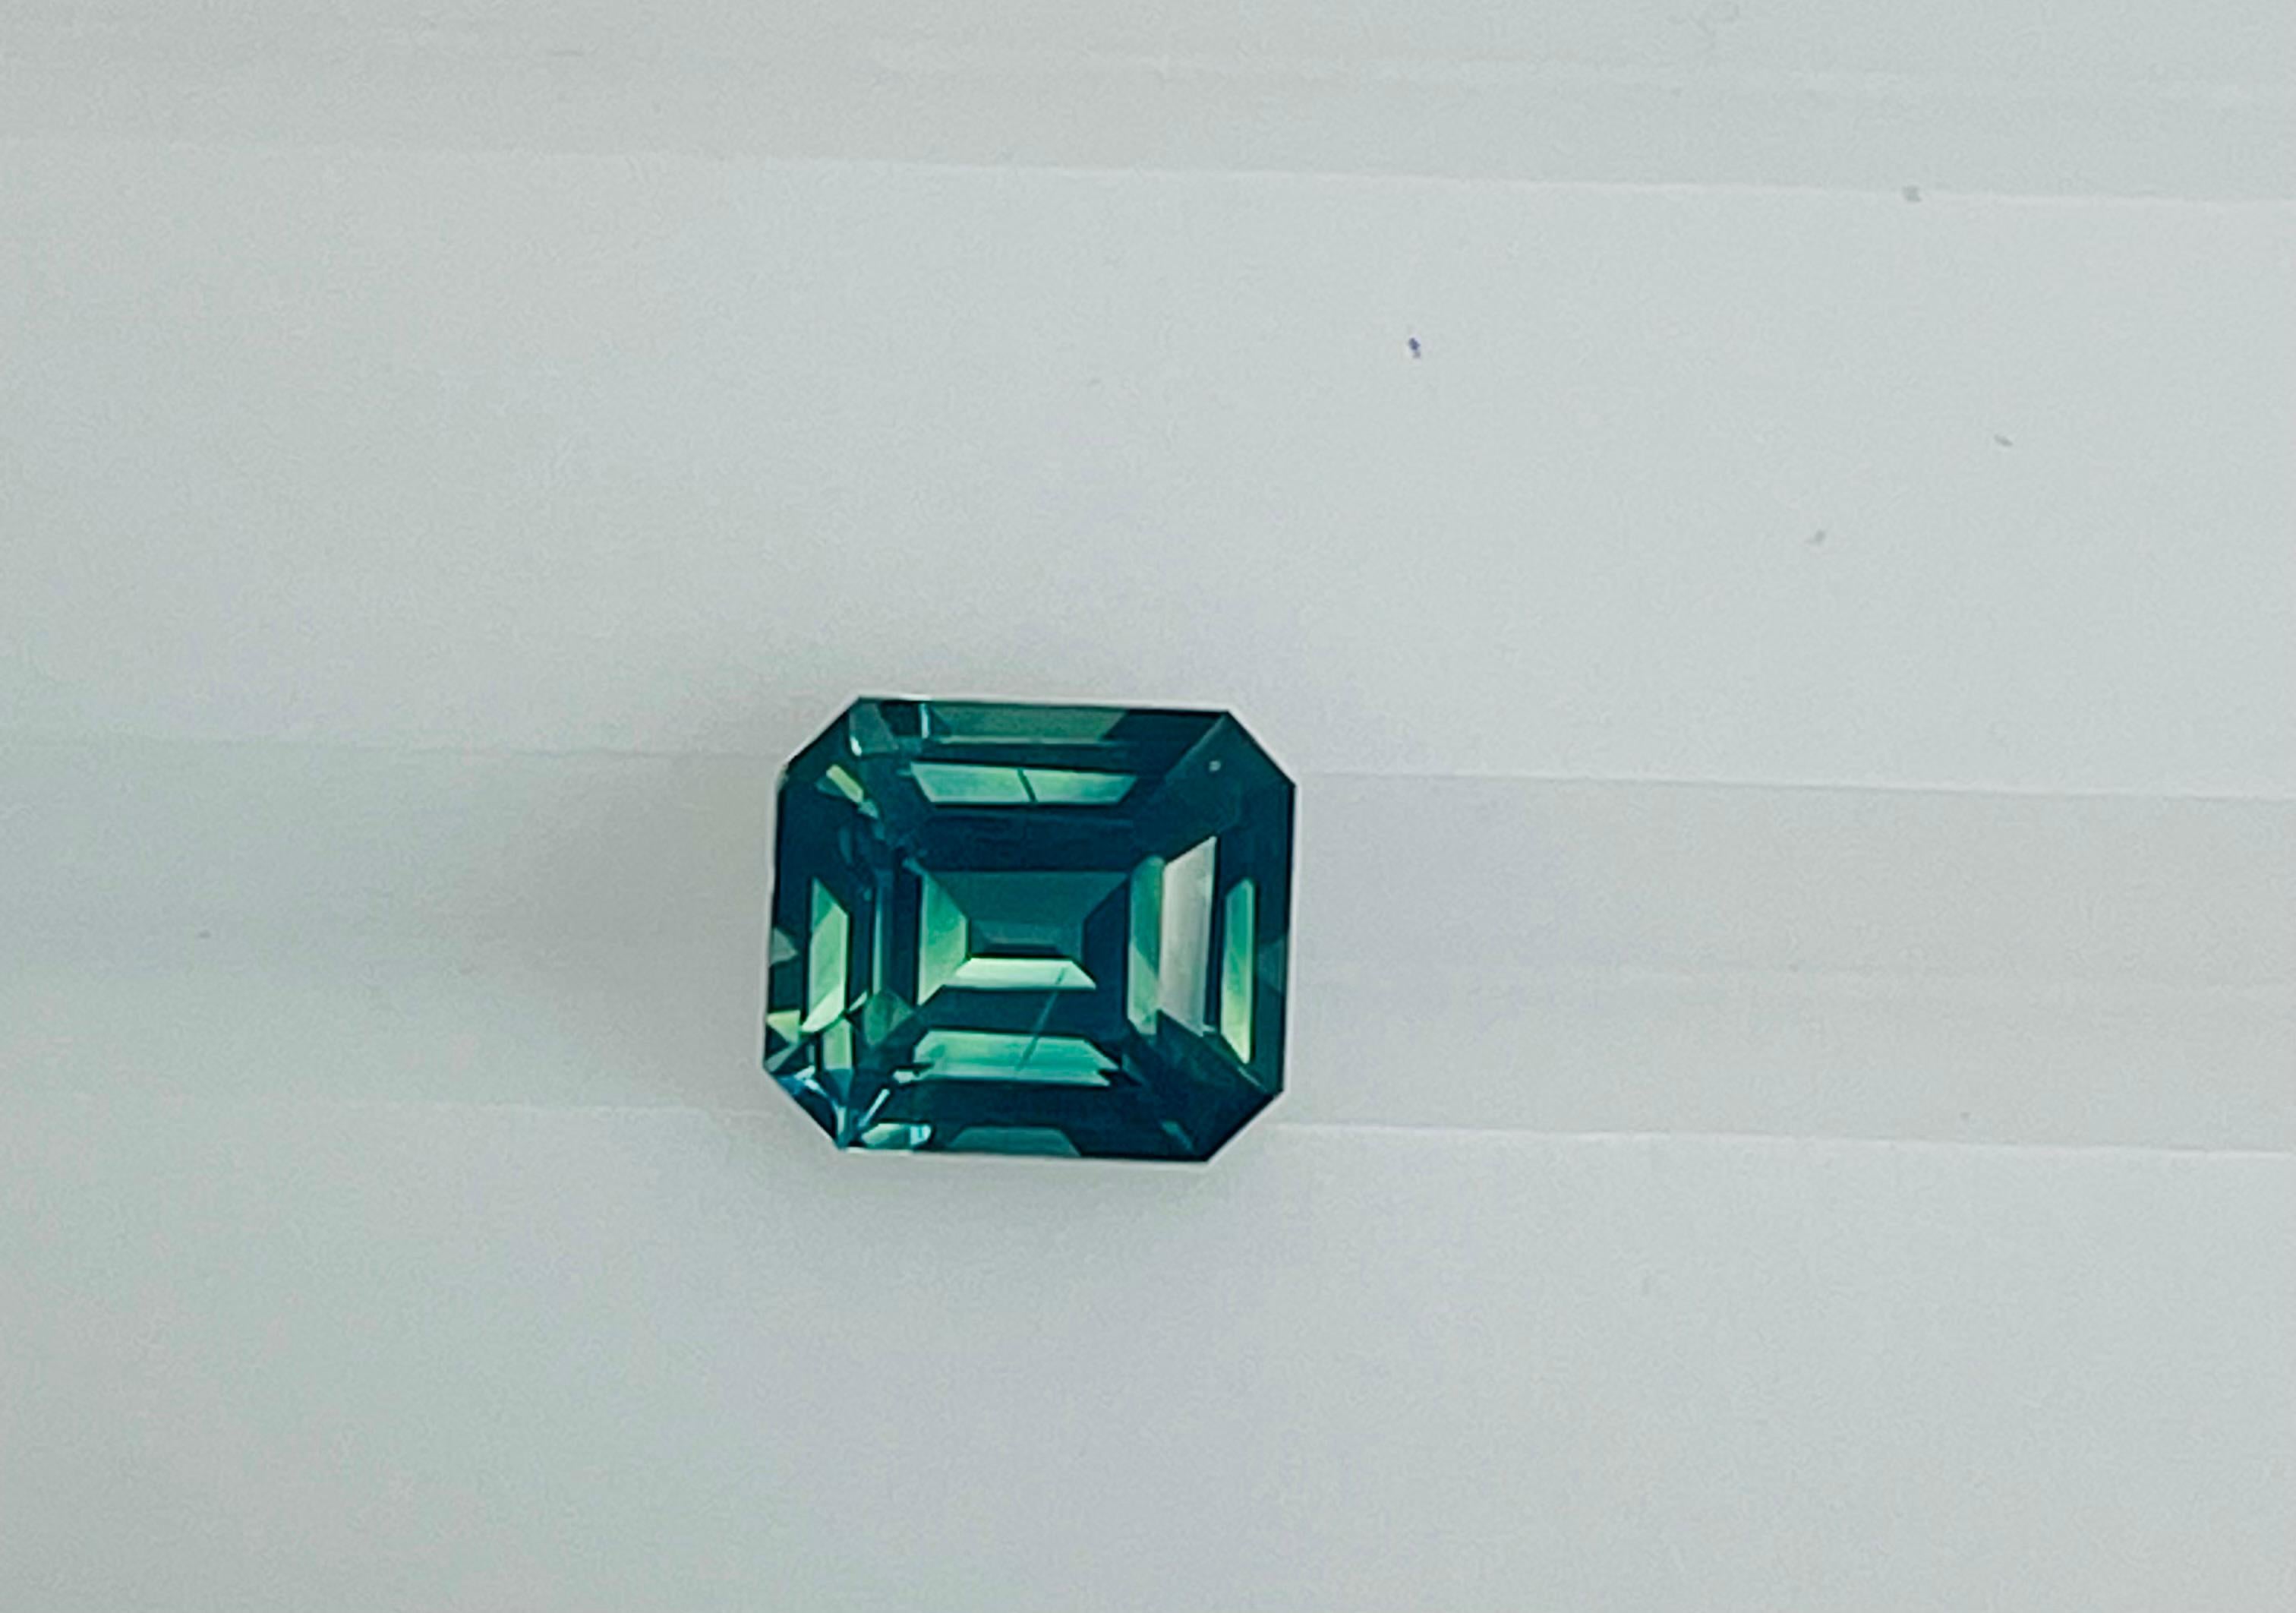 This 1.90 Ct Emerald cut Green Sapphire exhibits beautiful mix of blue and green color which is also referred to as Teal color Sapphire., it is beautifully cut and exhibits great color .